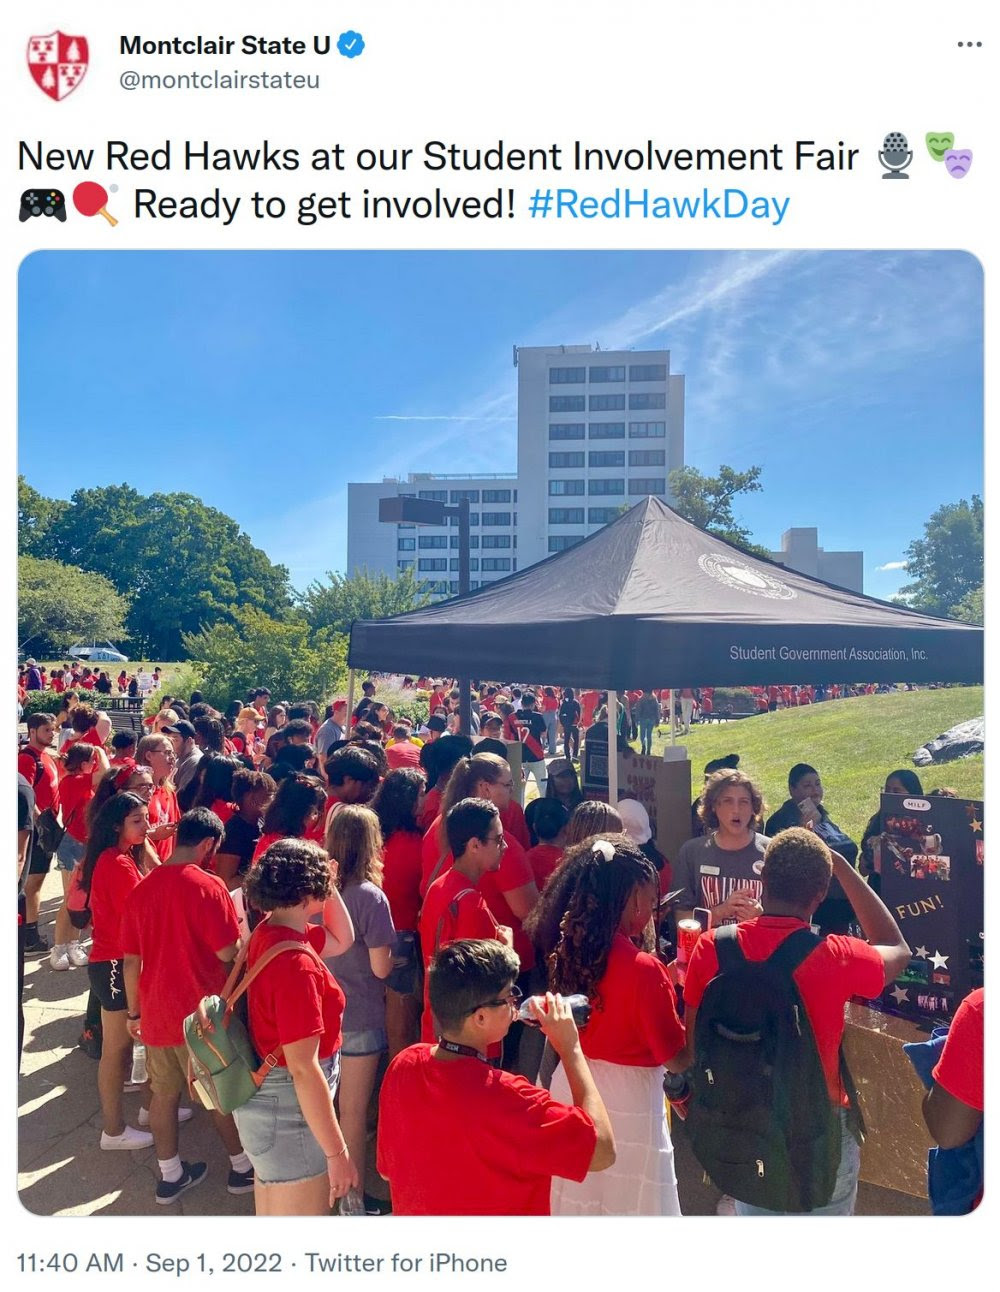 @montclairstateu: New Red Hawks at our Student Involvement Fair Ready to get involved! #RedHawkDay